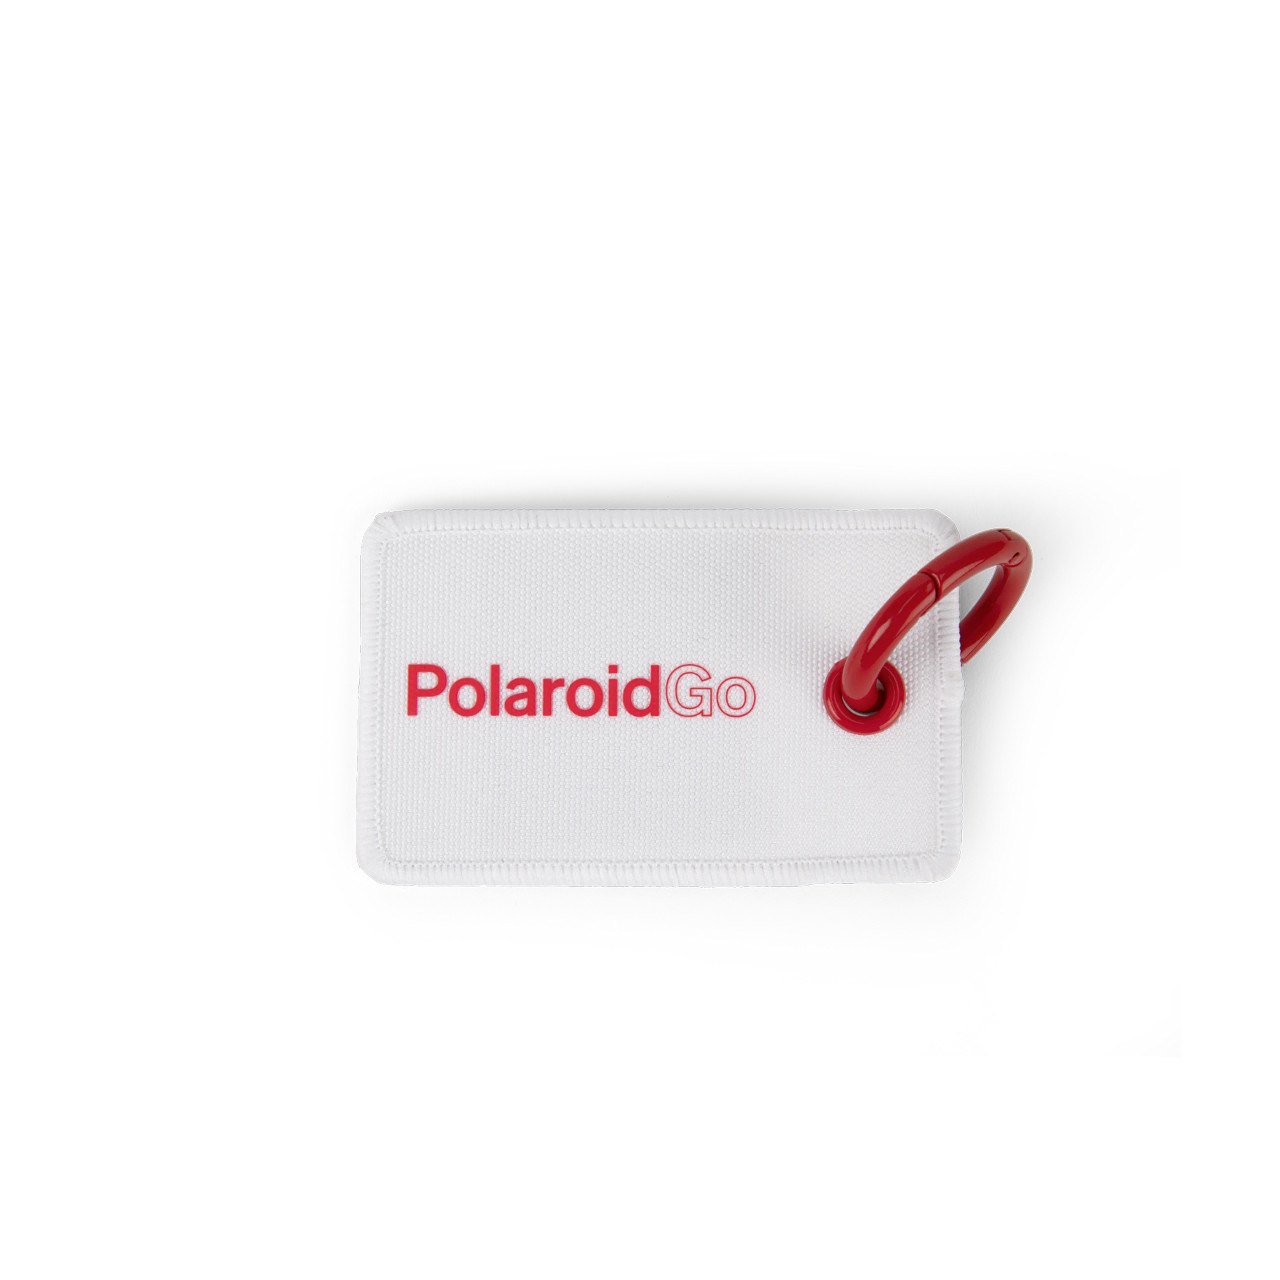 Depicts the front of the Polaroid Go Photo Tag.